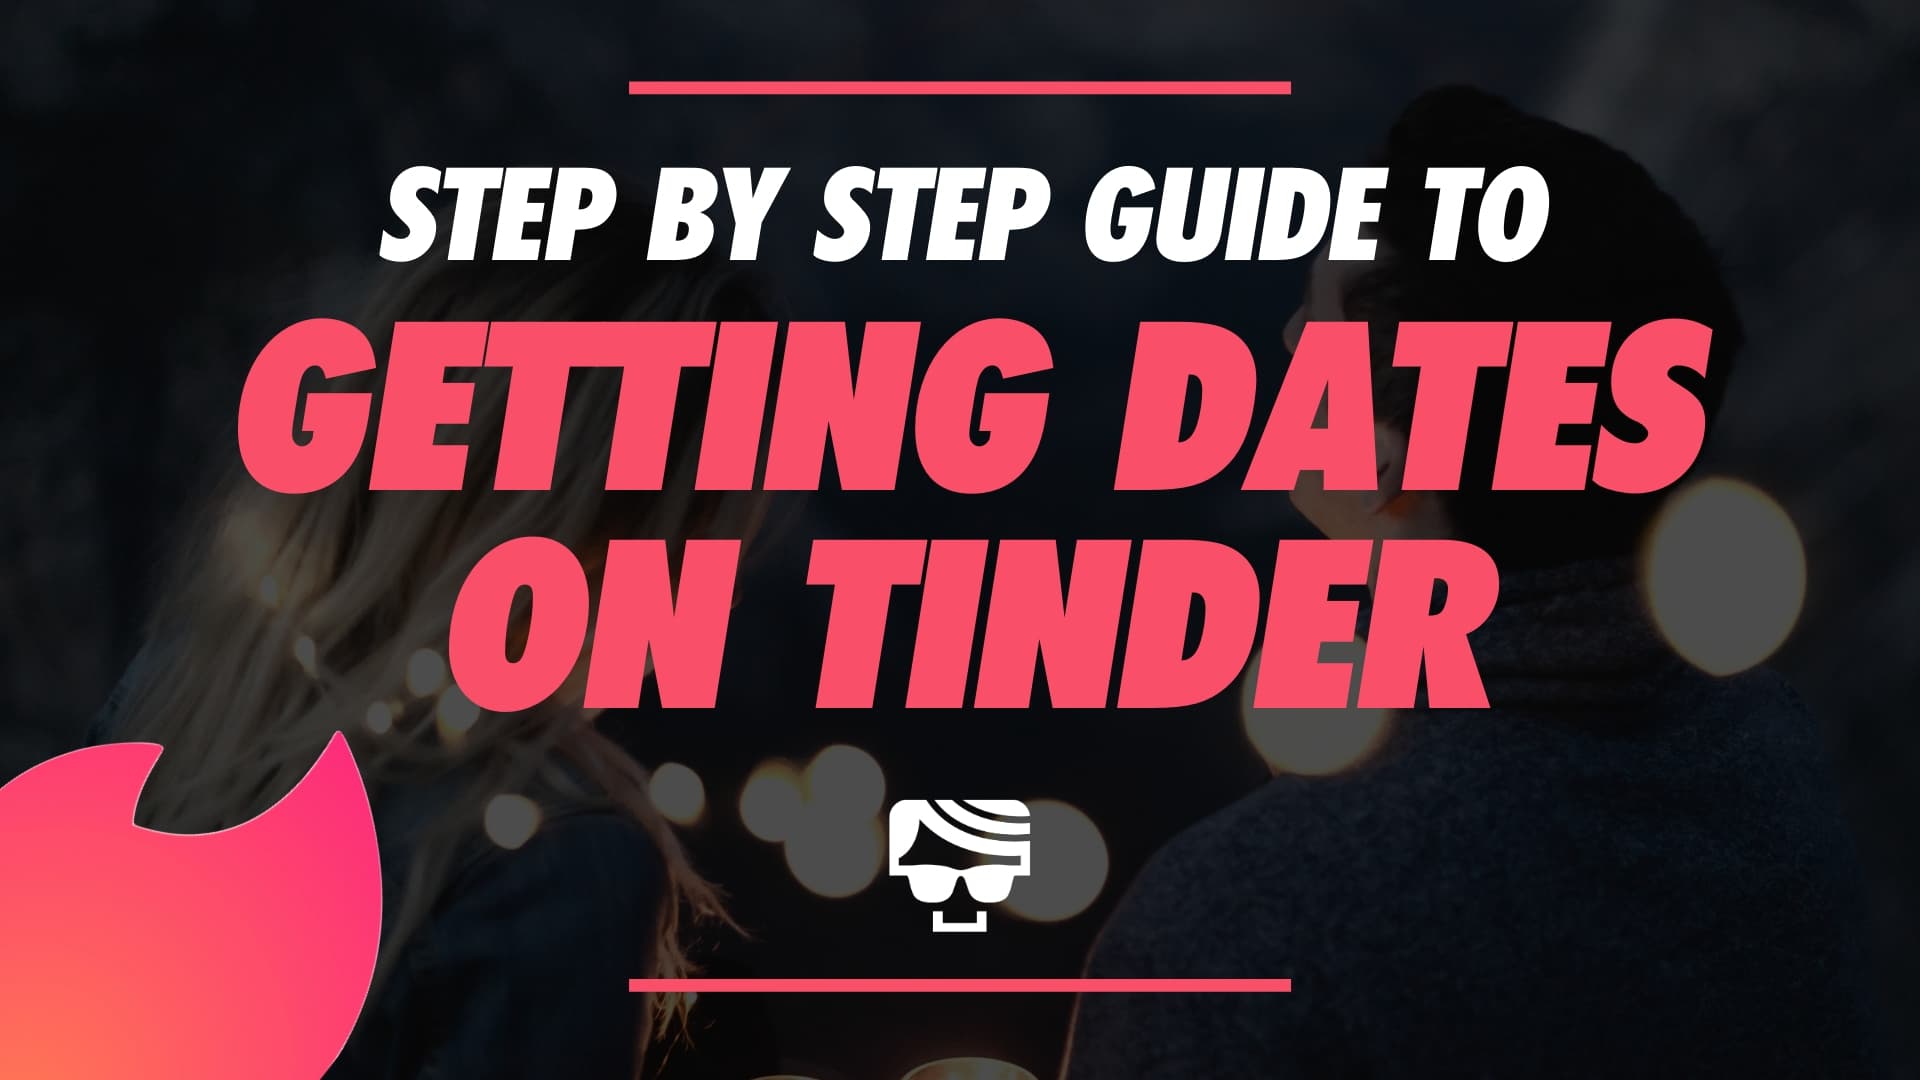 Step By Step Guide To Getting Dates On Tinder